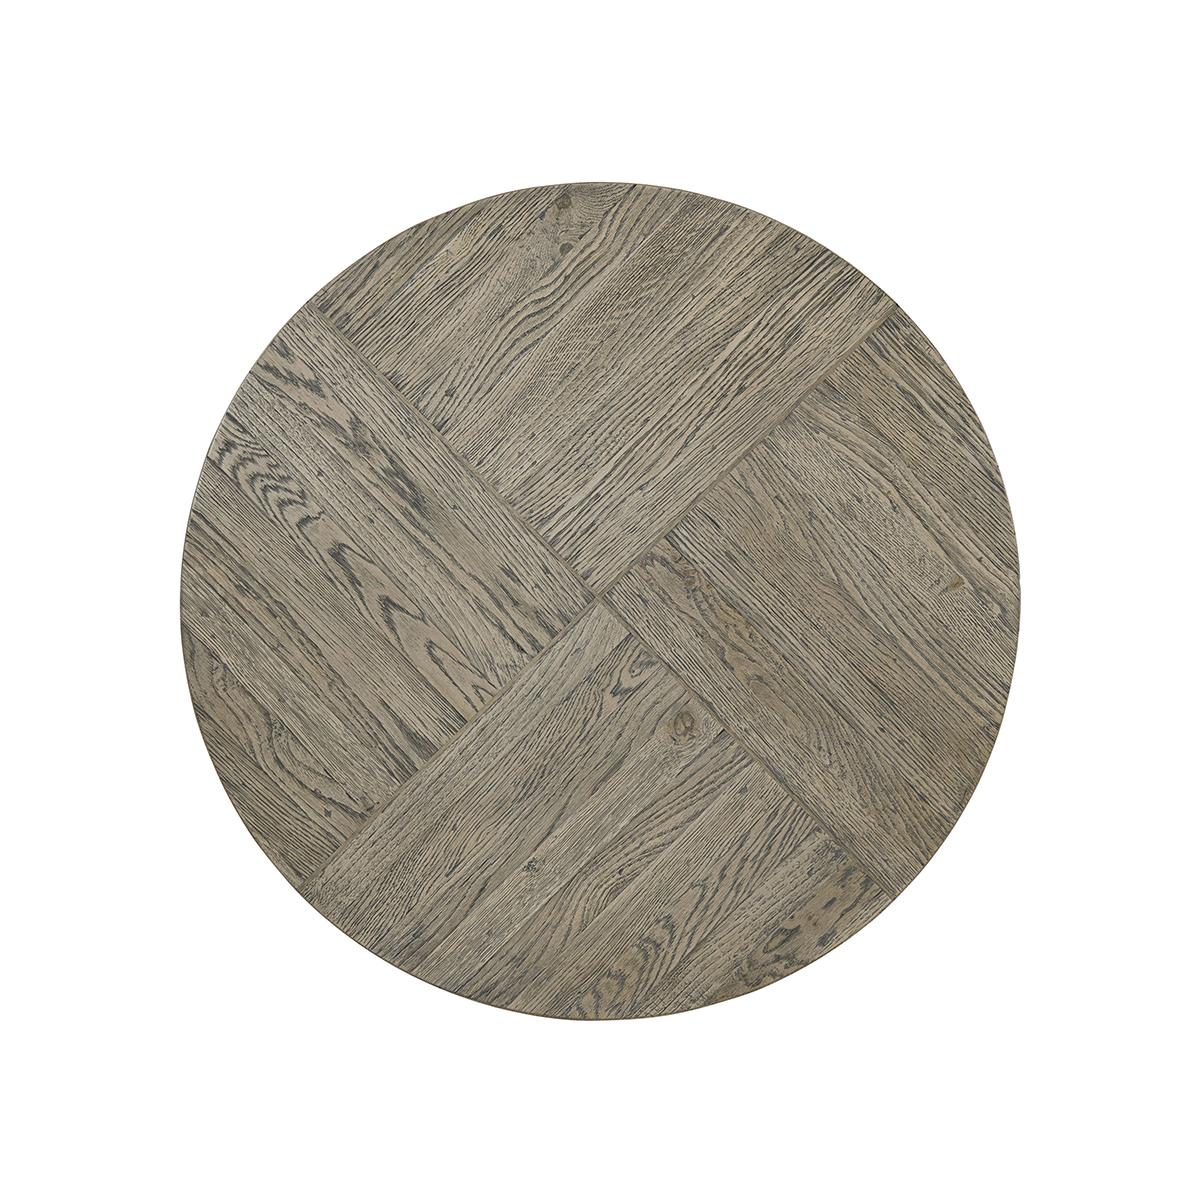 handcrafted with a round rustic oak and walnut strung parquetry top in our 'grey echo oak' finish with a planked solid cross-section base and cut-out legs.

Dimensions: 28